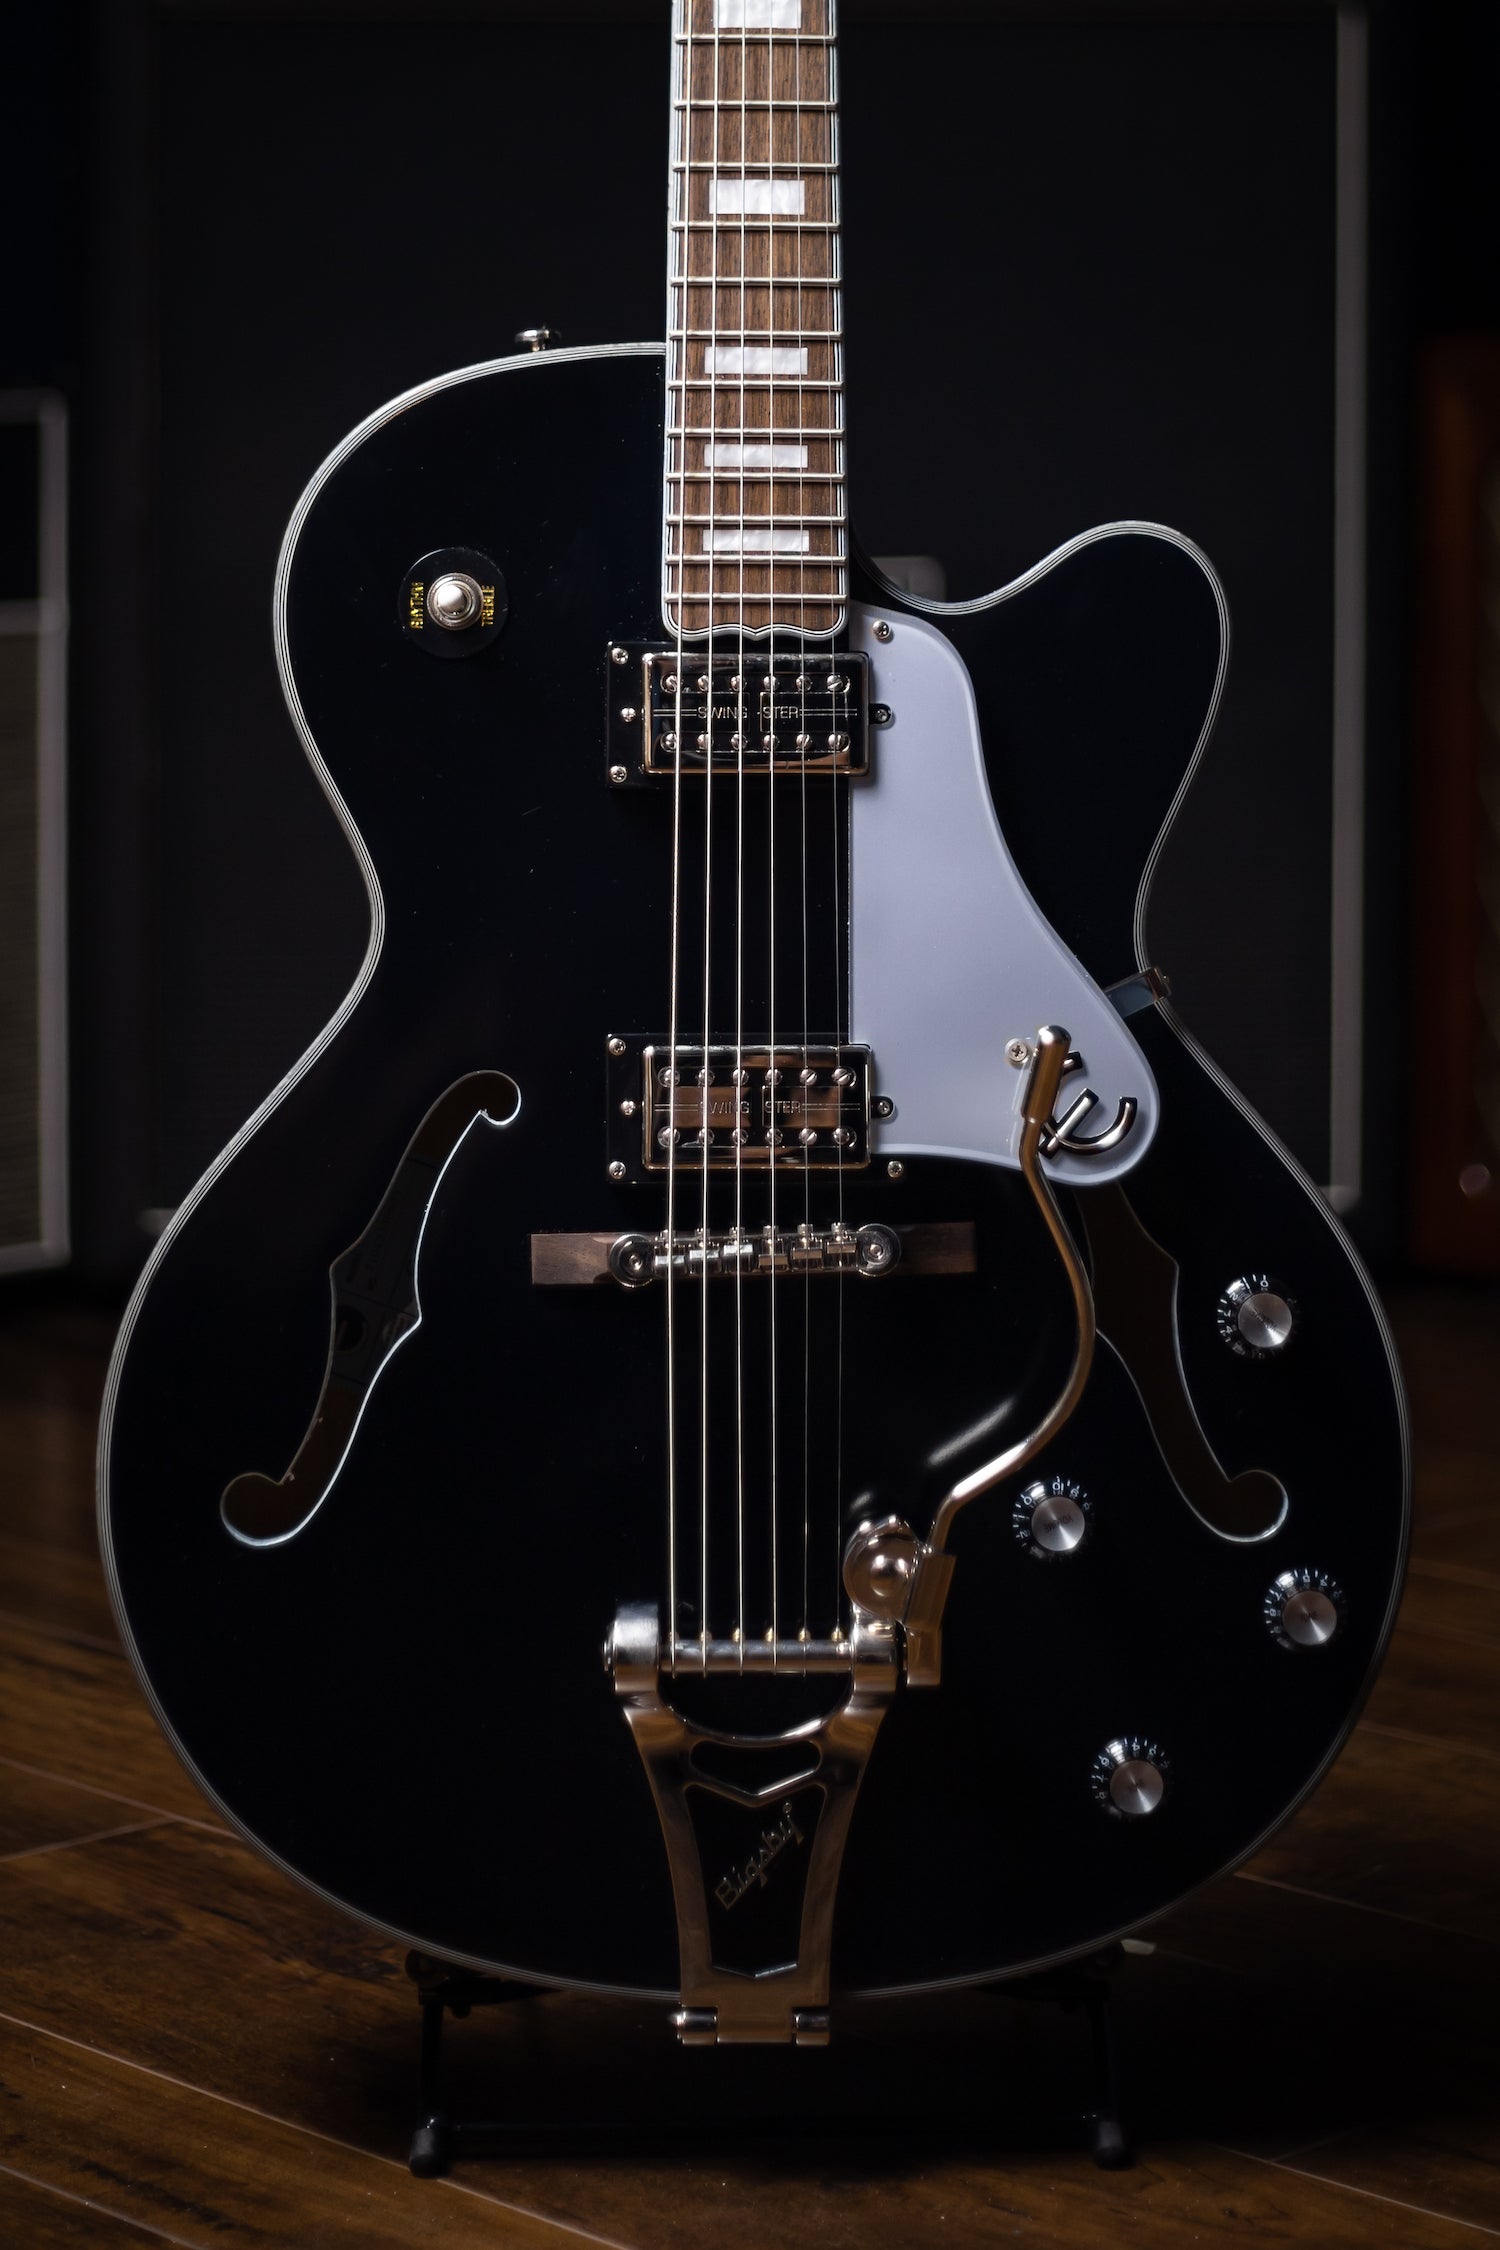 Epiphone Emperor Swingster Electric Guitar - Black Aged Gloss